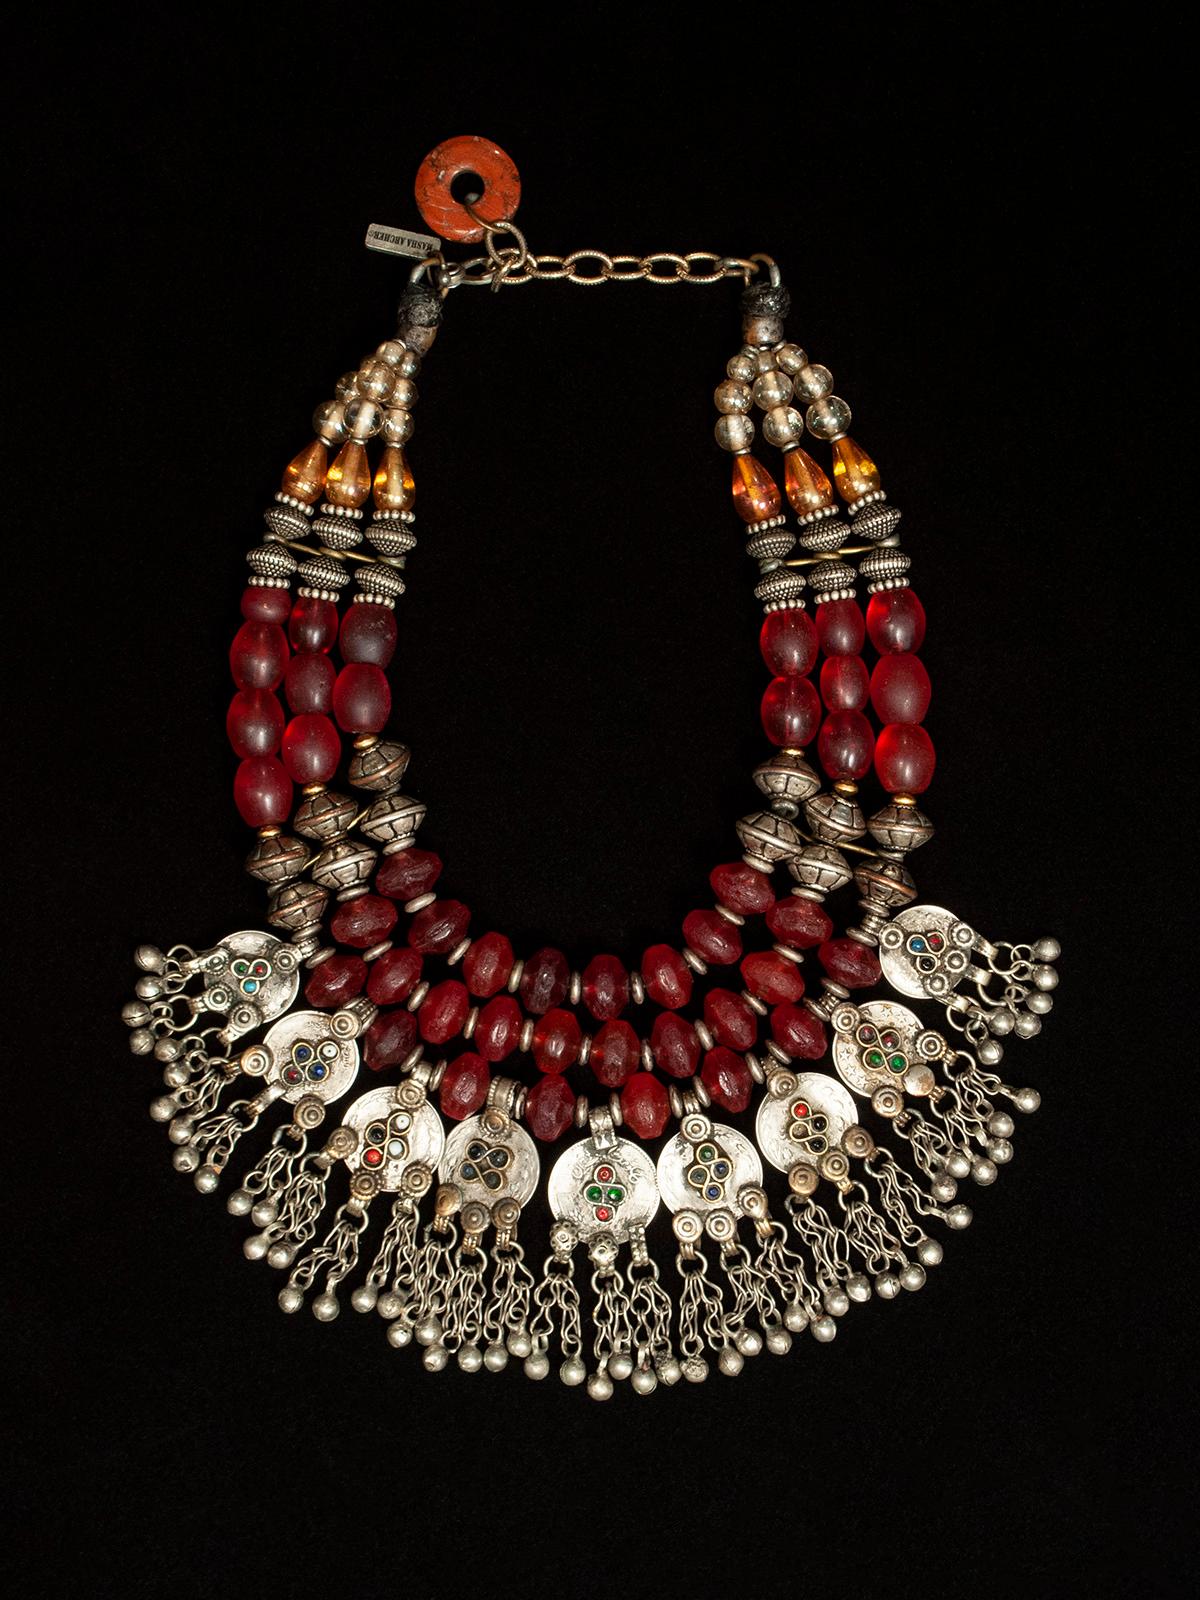 Masha archer silver, red and green tribal necklace
A festive red Bohemian glass bead necklace with Middle Eastern coins from the famed San Francisco jewelry designer Masha Archer. The interior circumference measures from 16 - 19 inches, depending